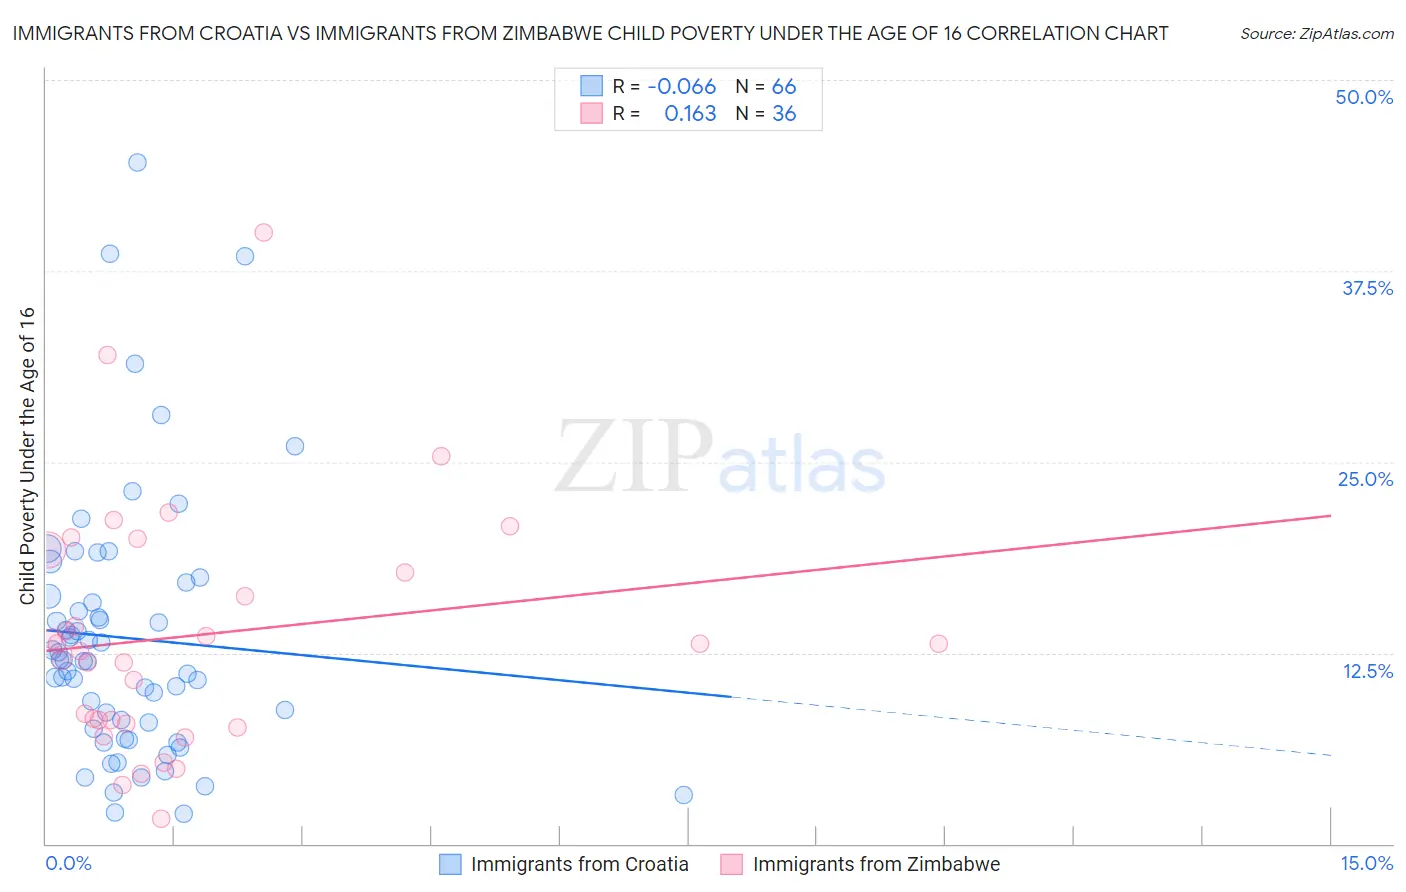 Immigrants from Croatia vs Immigrants from Zimbabwe Child Poverty Under the Age of 16